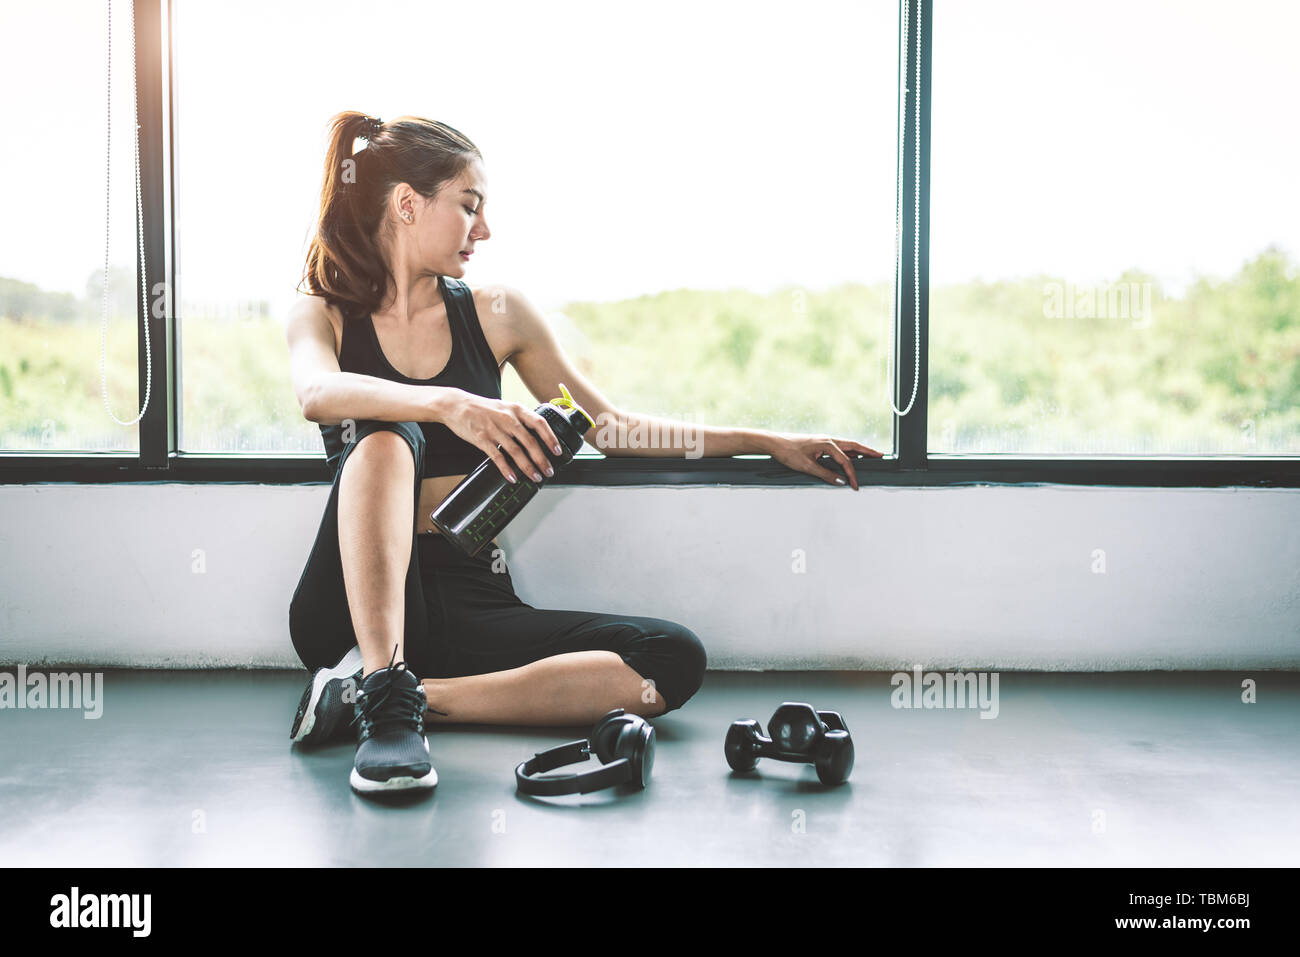 Woman with dumbbell and device exercise lifestyle workout in gym fitness breaking relax after sport training with protein shake bottle background. Hea Stock Photo